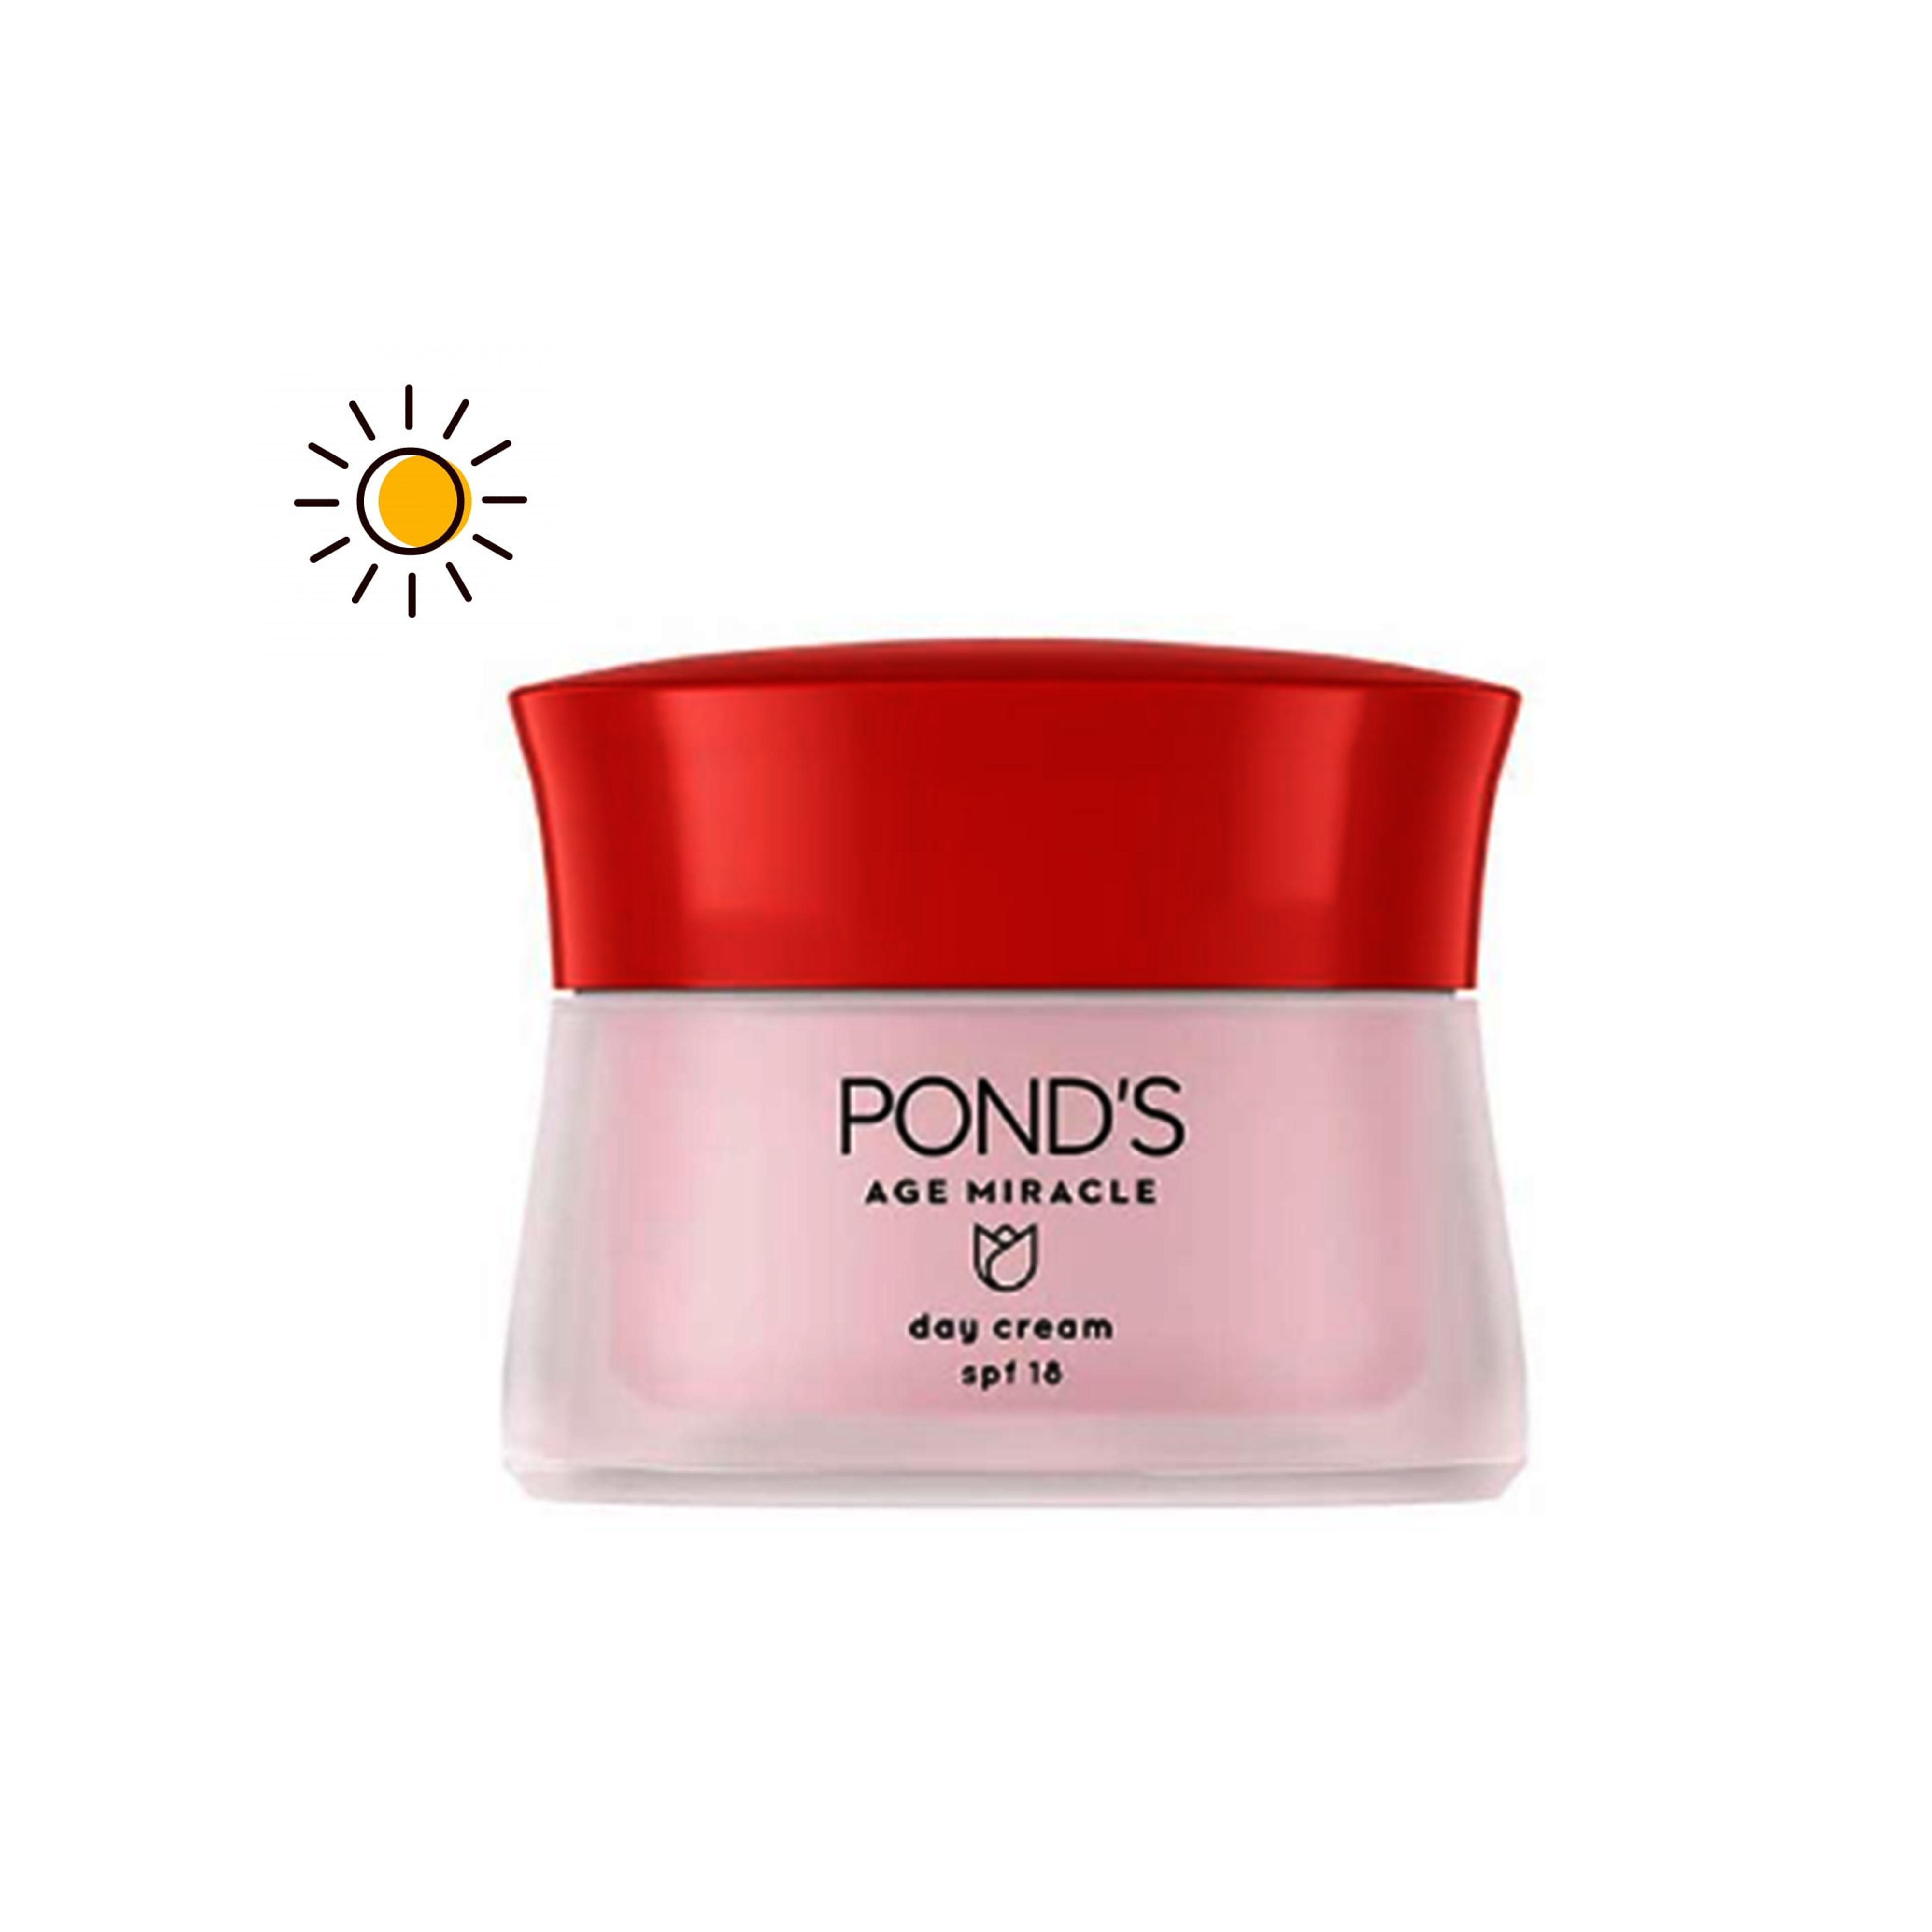 Ponds Age Miracle Day Cream SPF 18 10 gr / Krim Siang